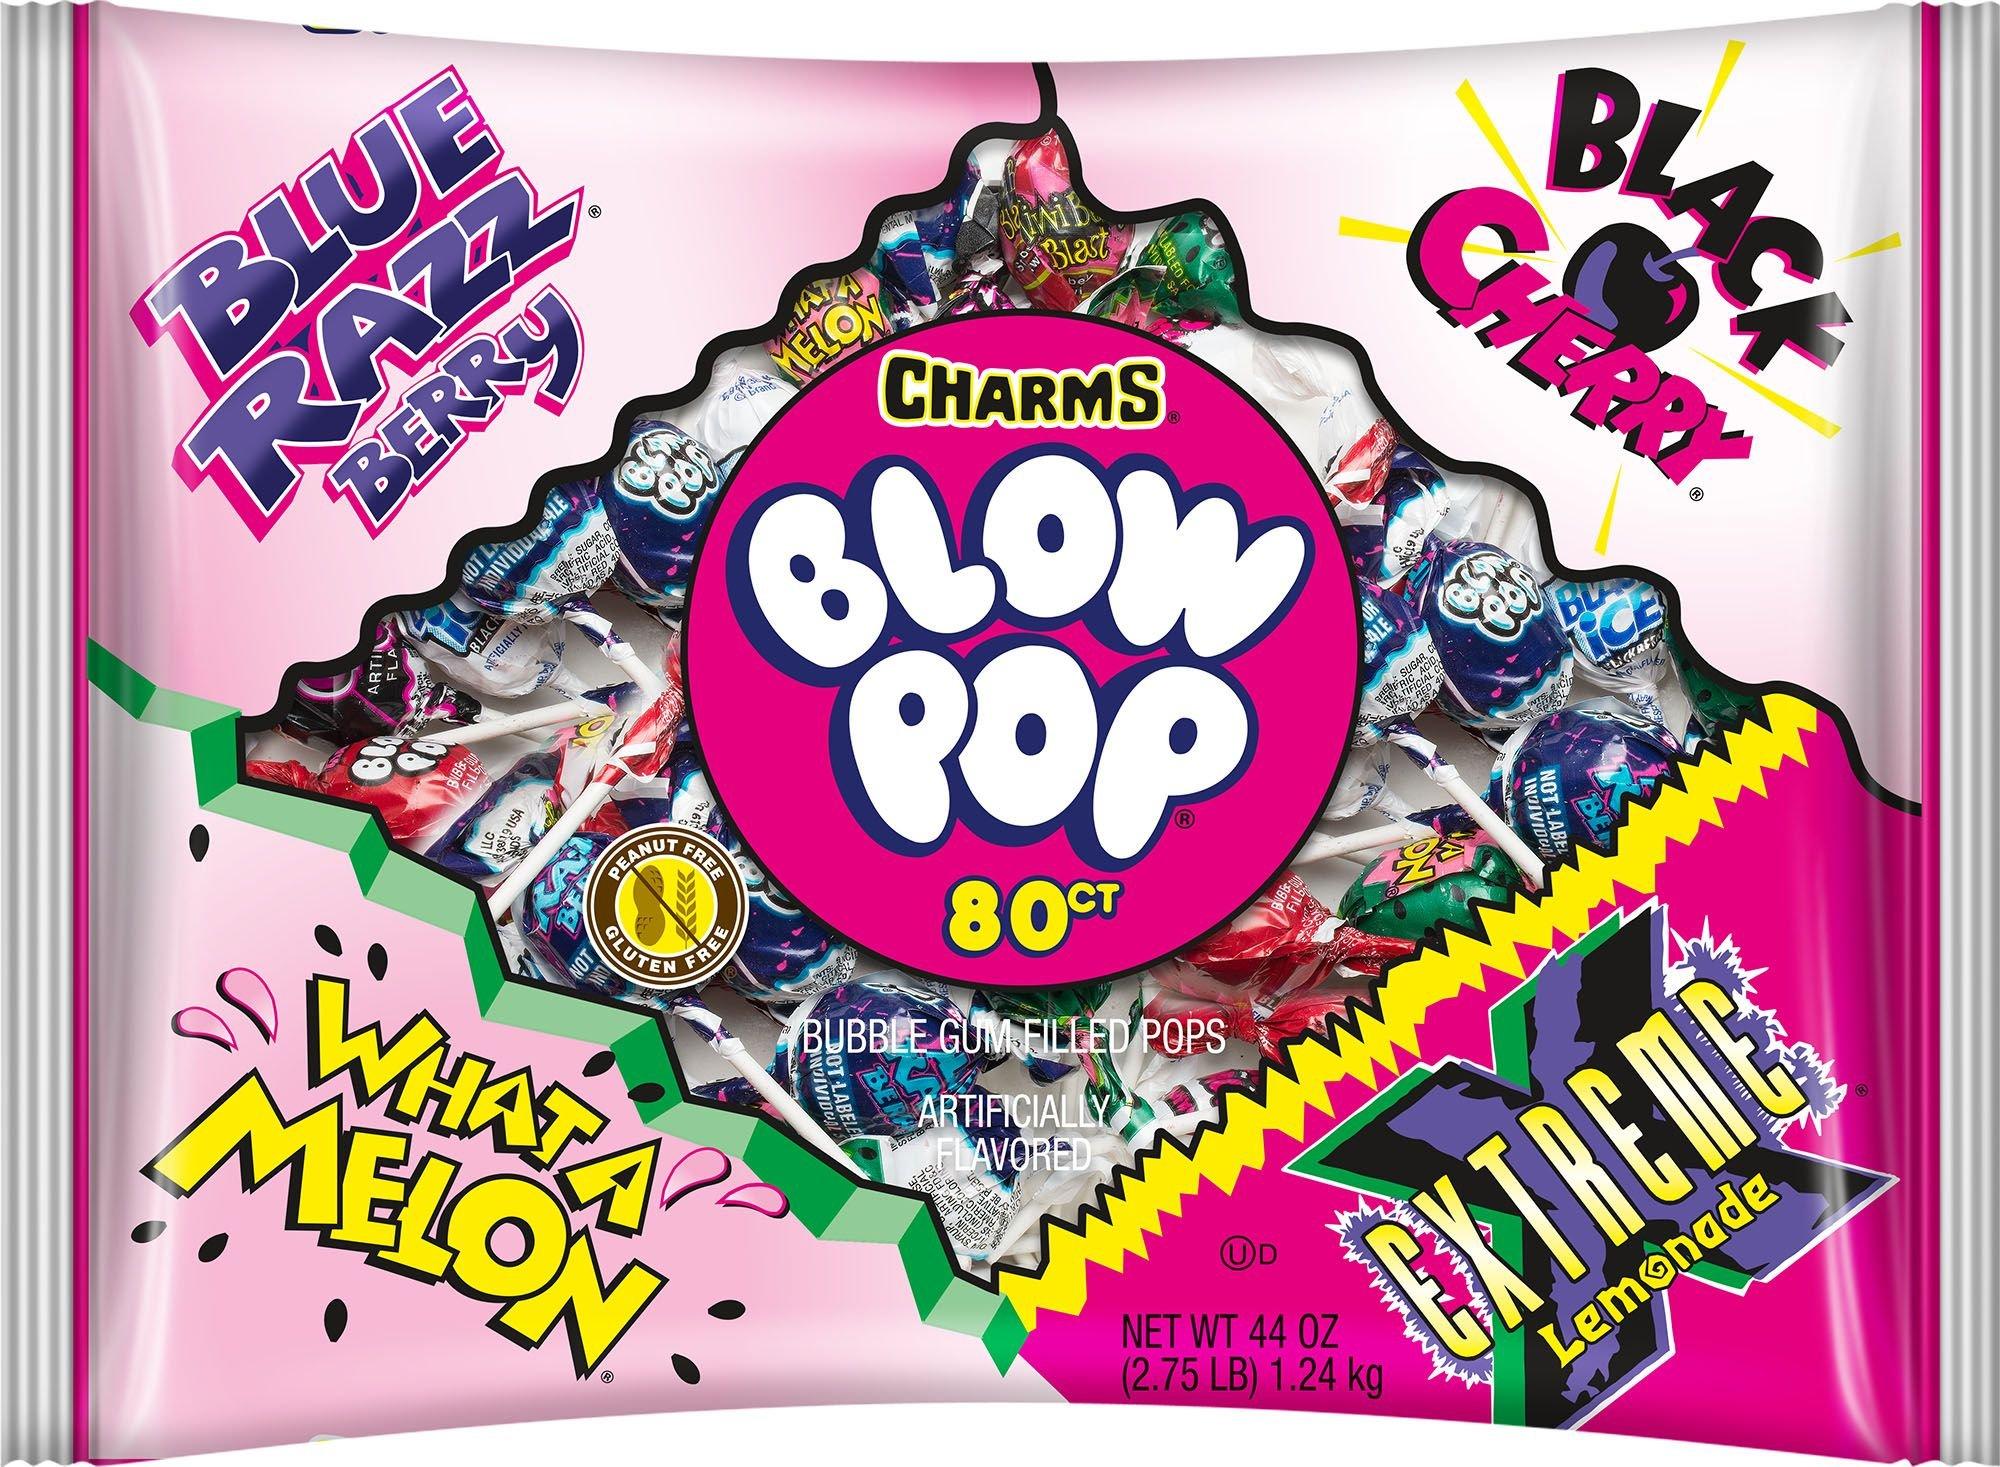 Charms Blow Pops 80ct